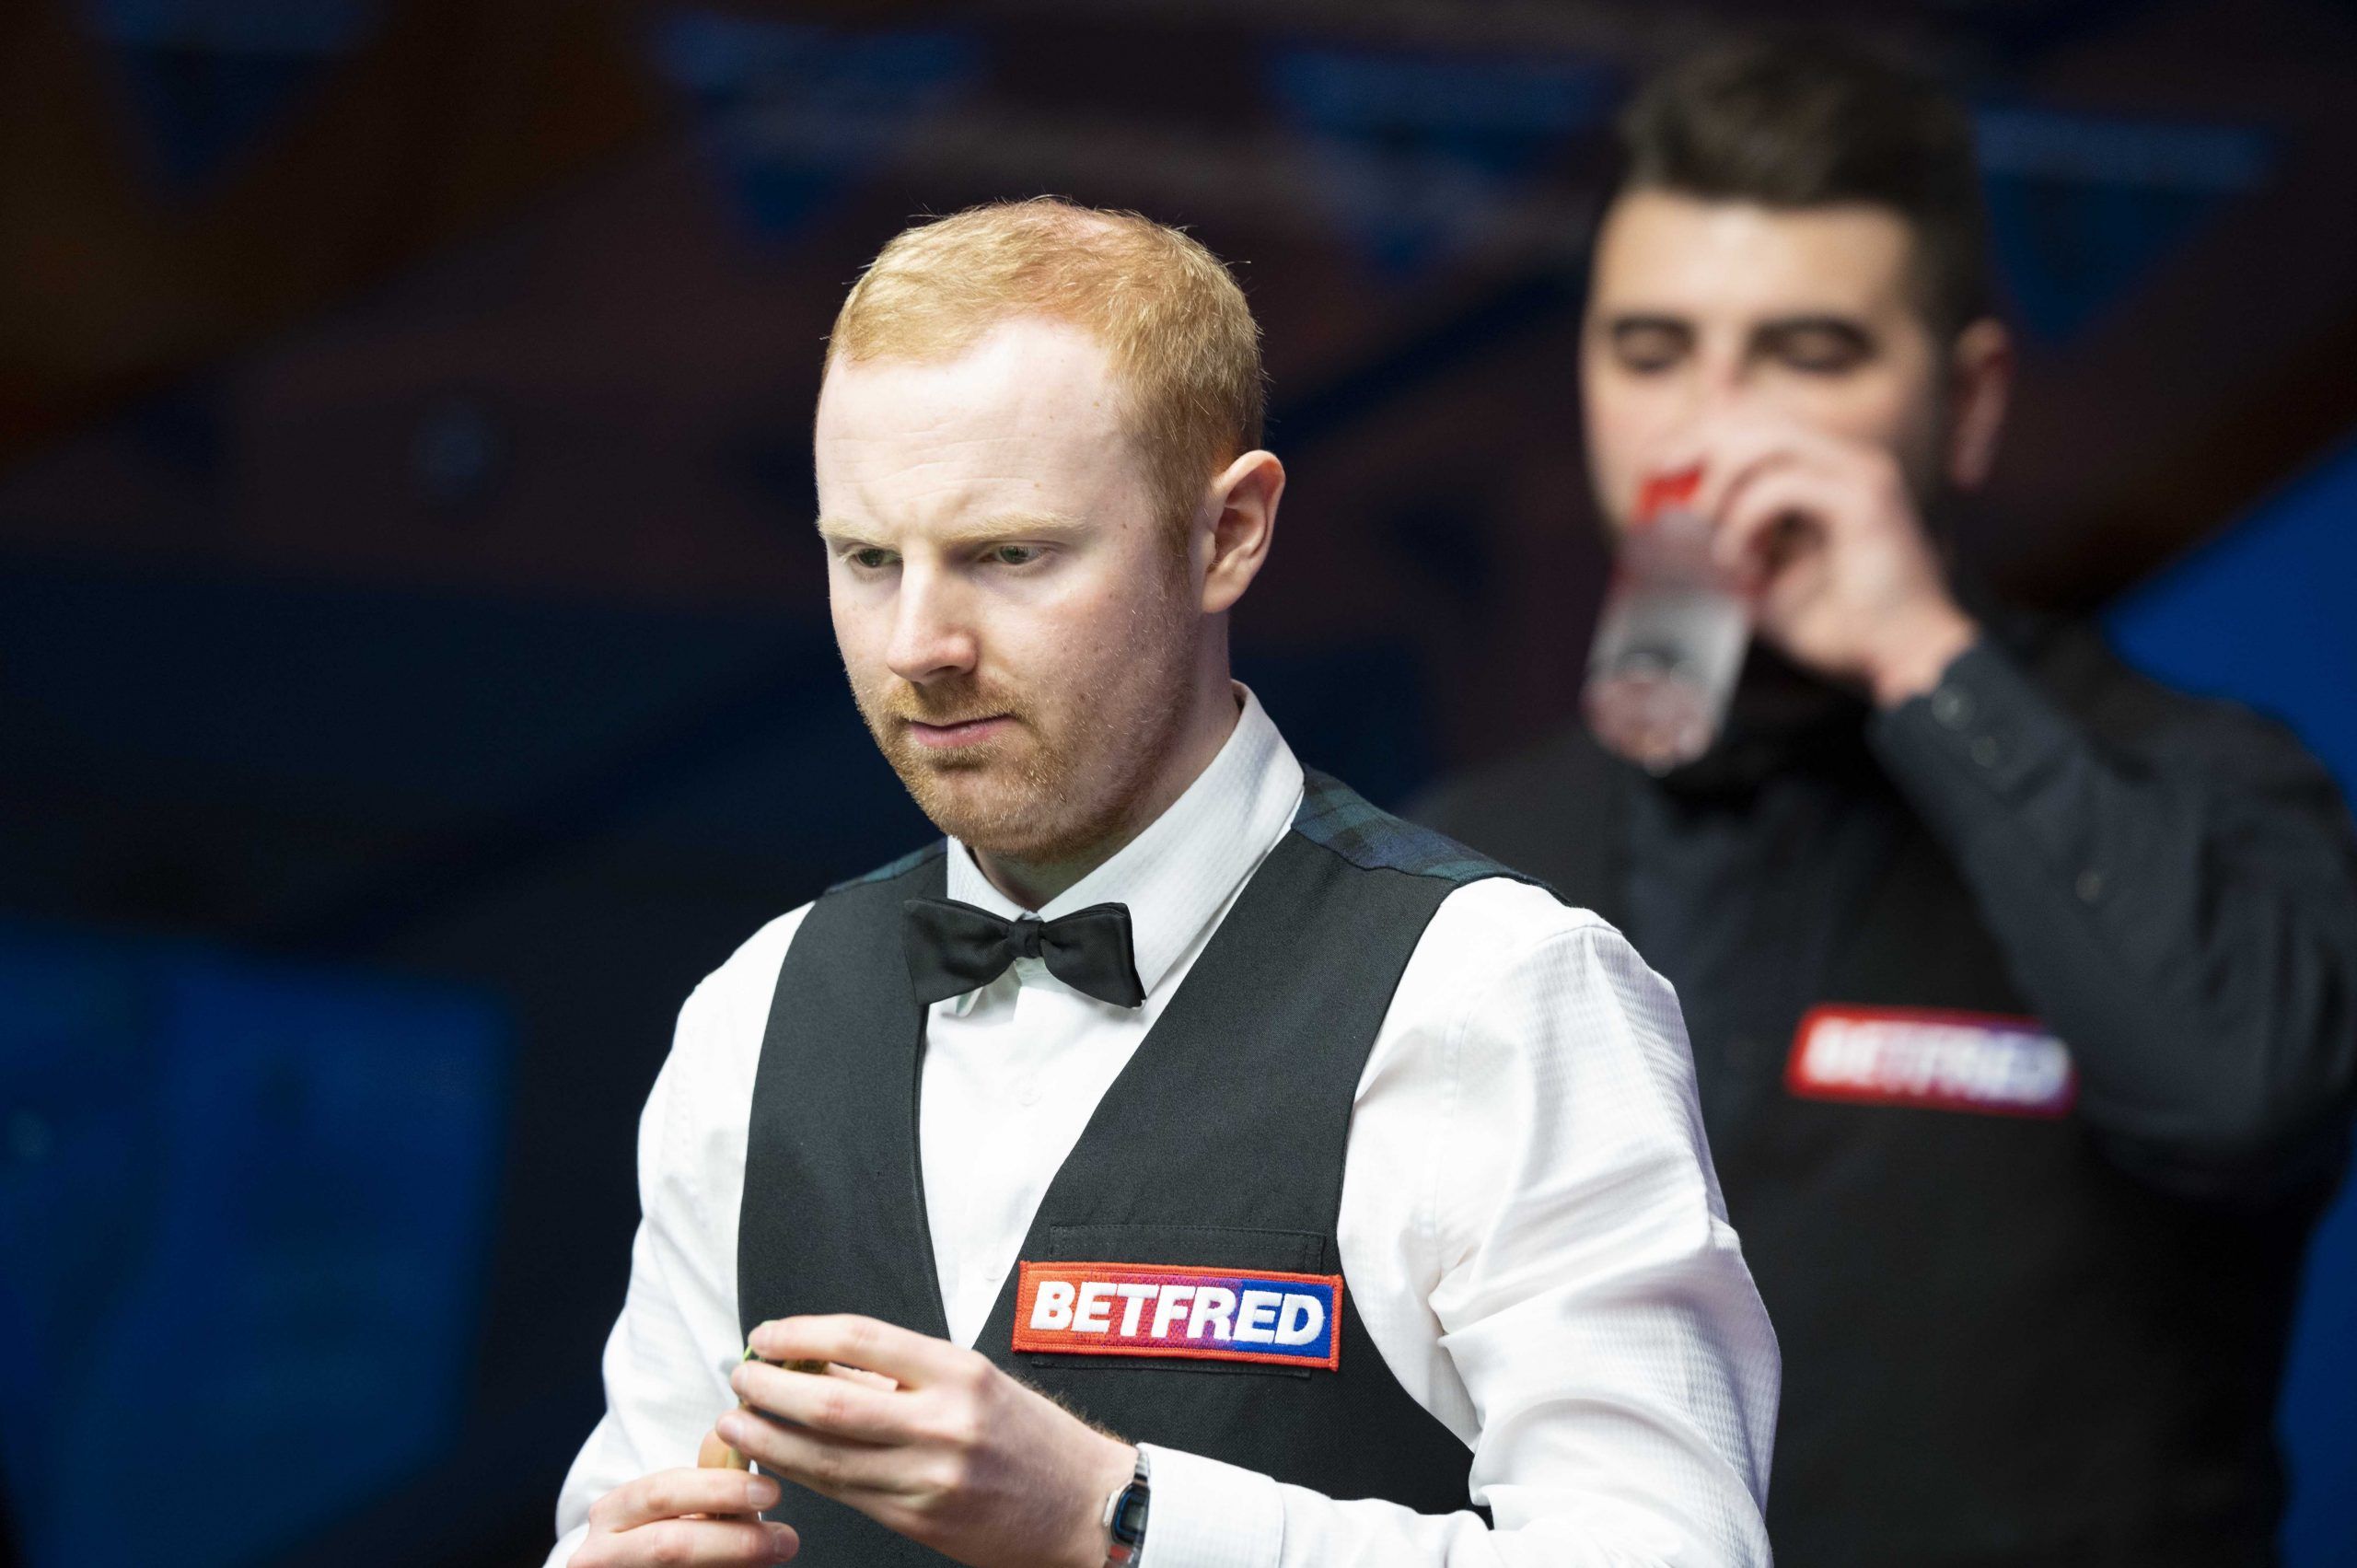 Anthony McGill vs Si Jiahui Prediction, Betting Tips & Odds │16 AUGUST, 2022